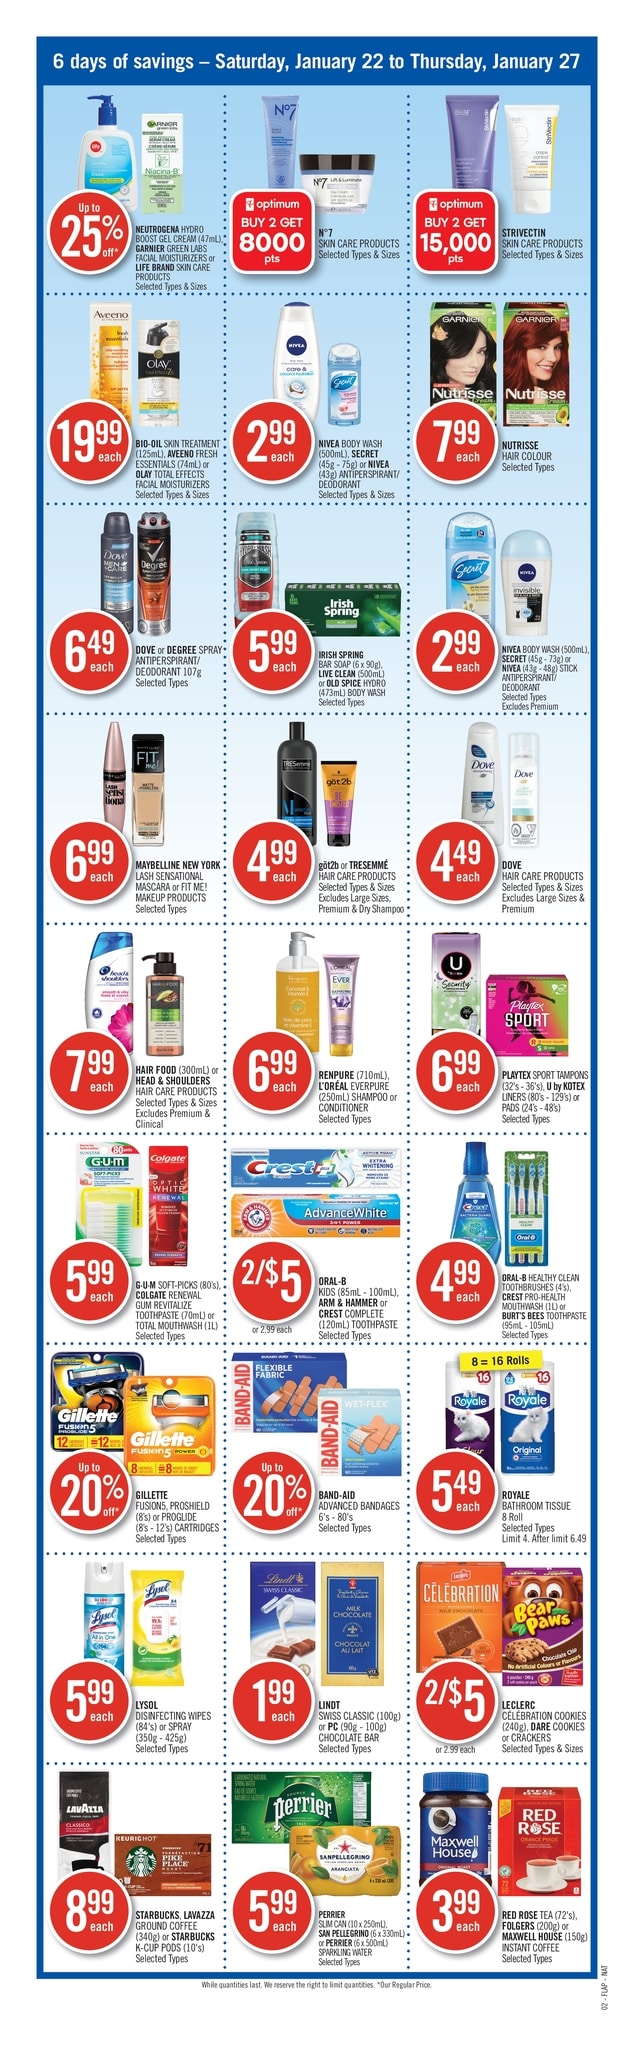 Shoppers Drug Mart - Weekly Flyer Specials - Page 2